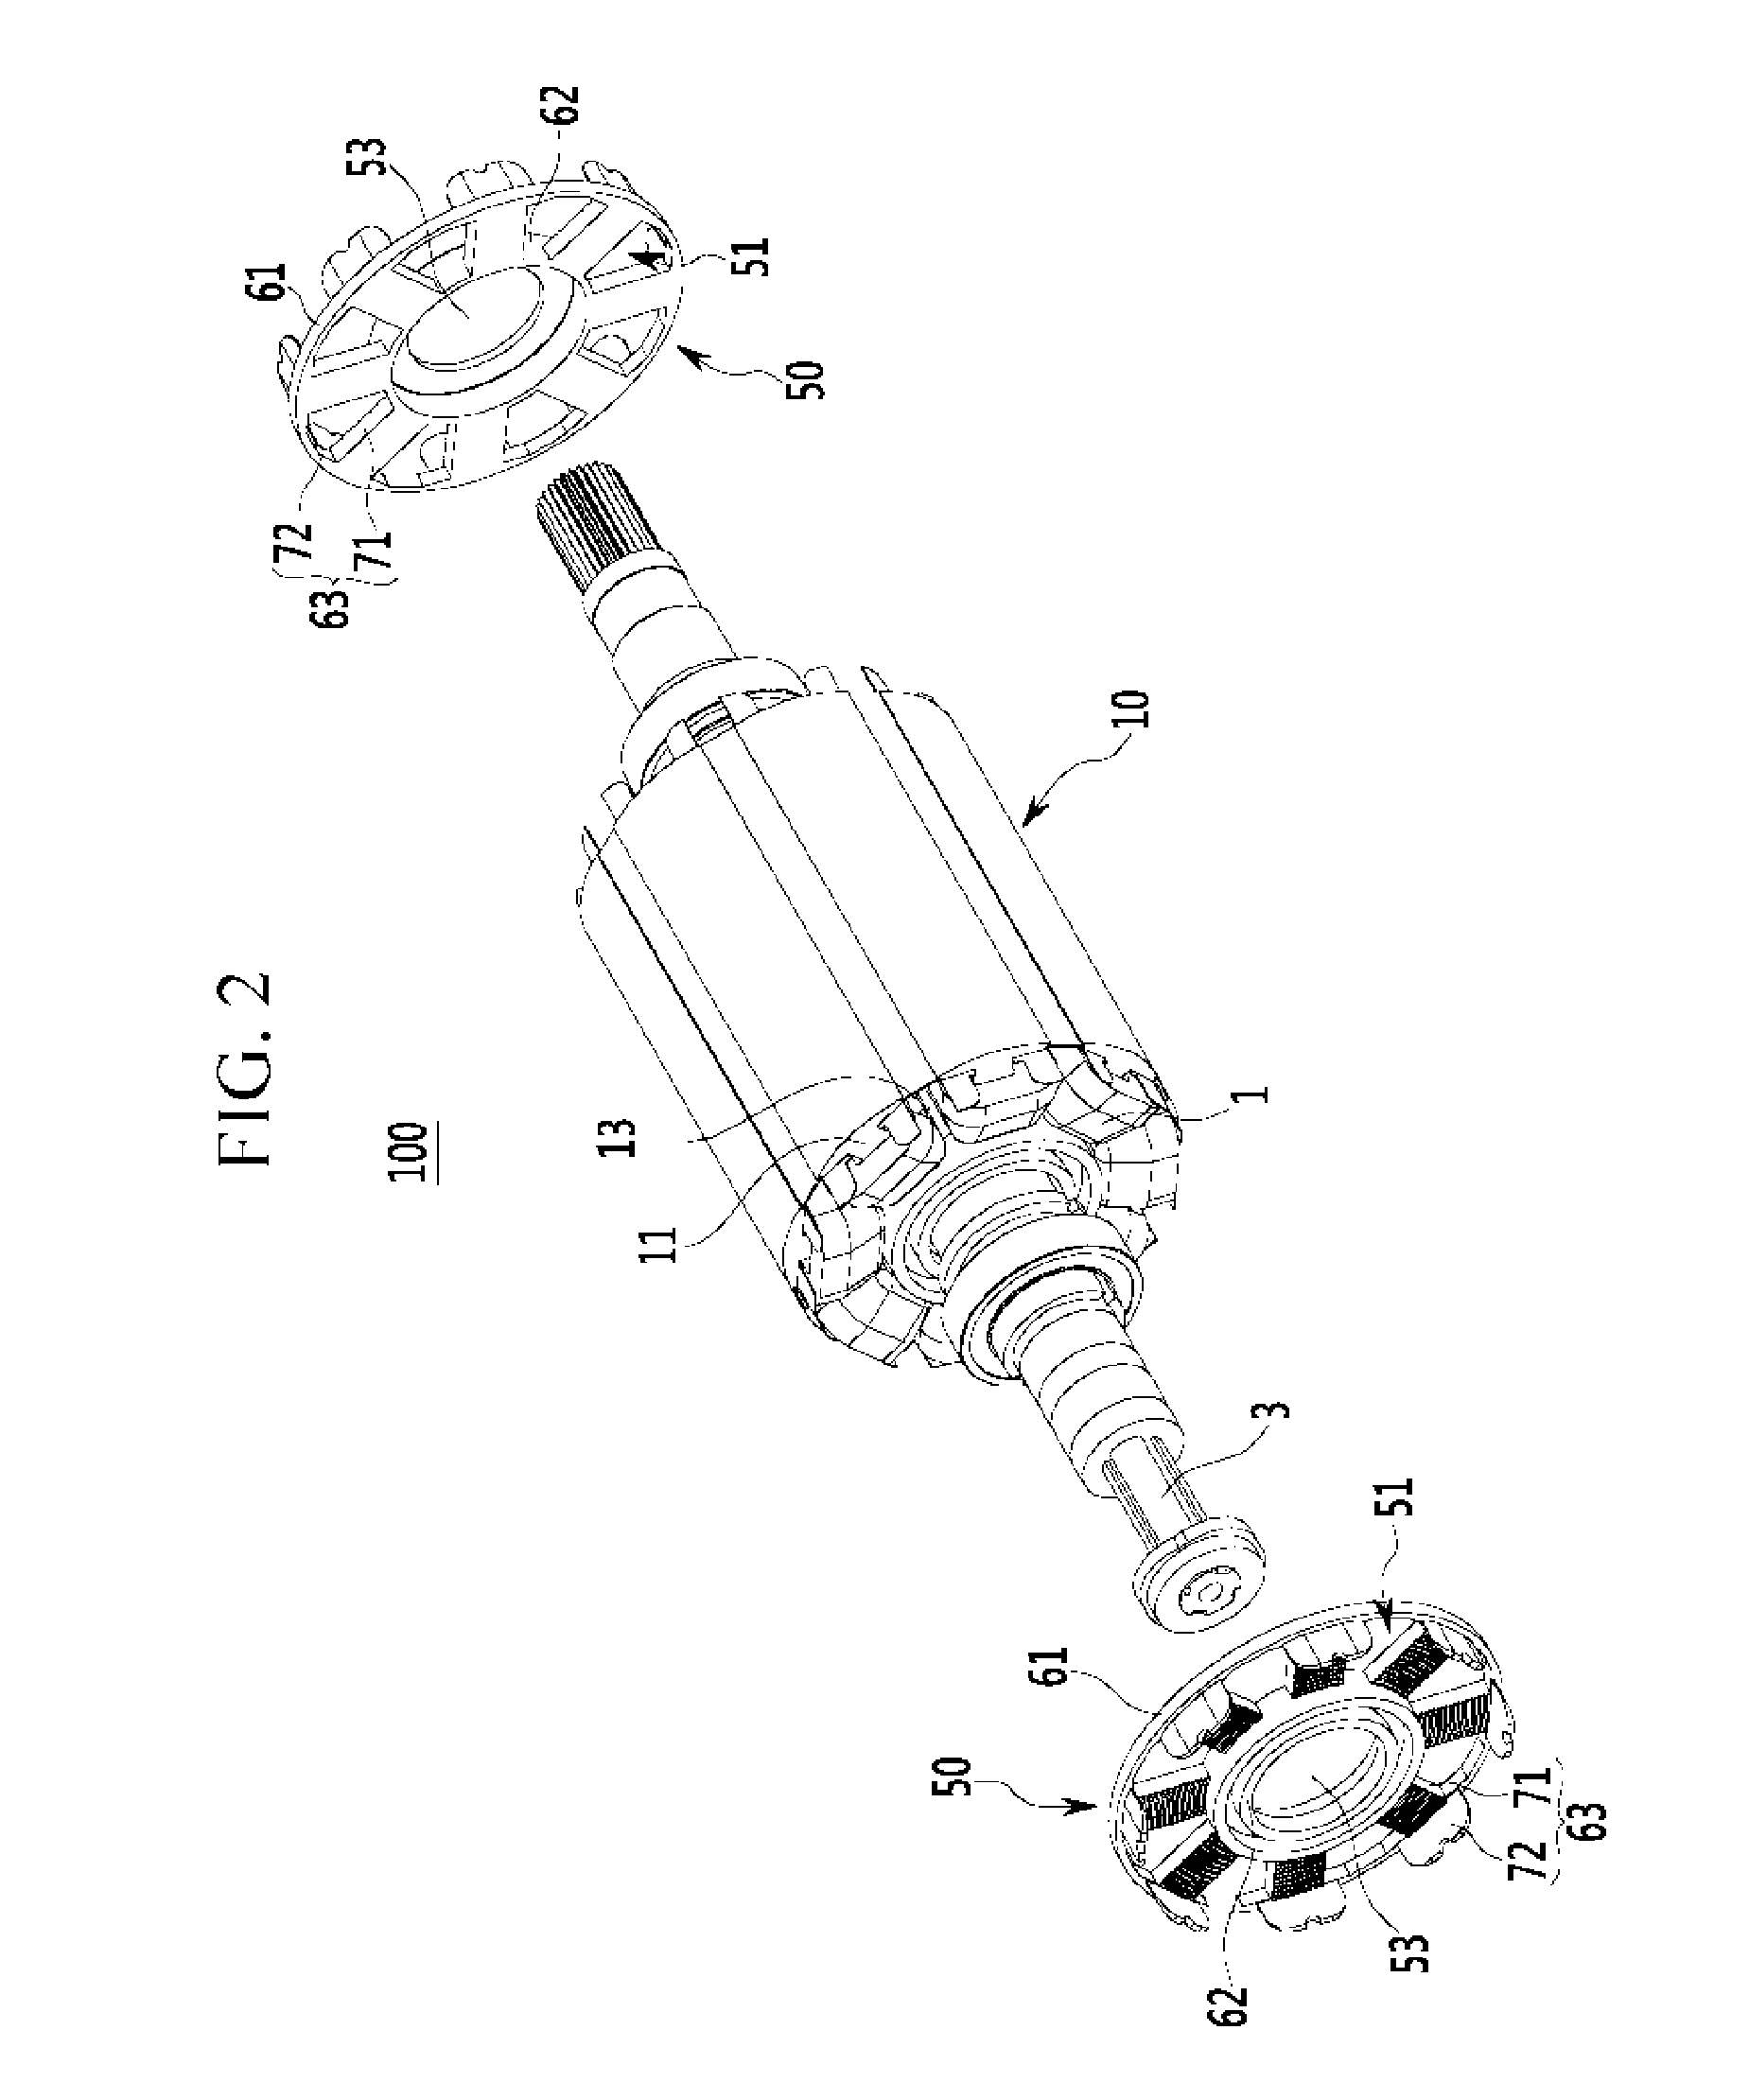 Rotor structure of wound rotor driving motor